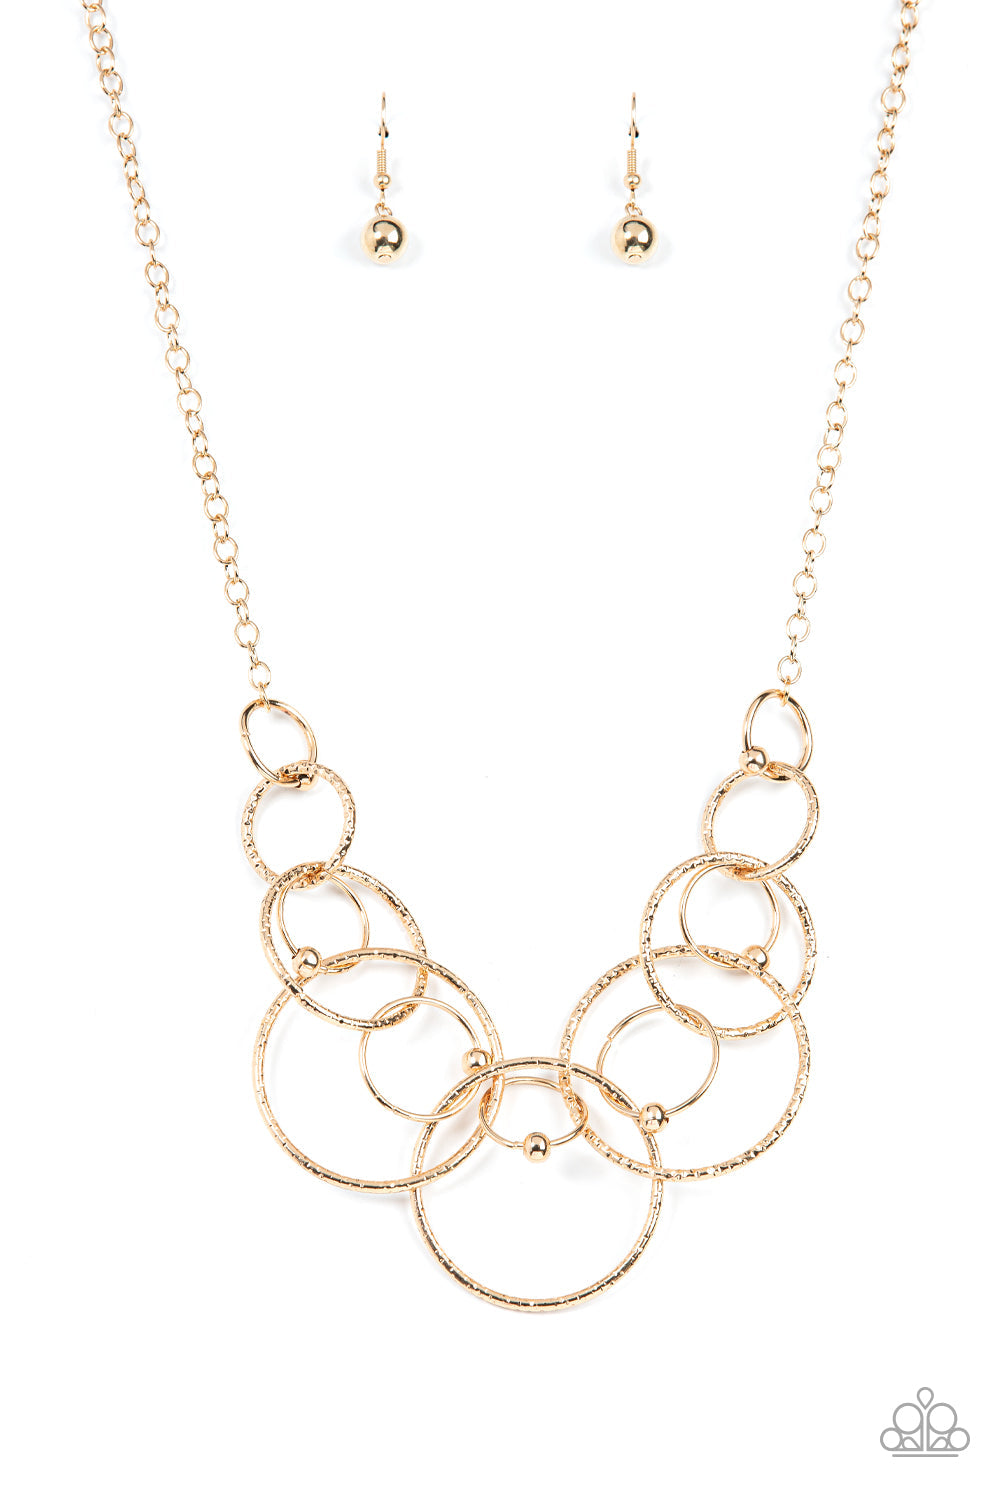 Encircled in Elegance - Gold Necklace - Paparazzi Accessories - Infused with dainty gold beads, shiny gold rings interlock with oversized and textured gold rings below the collar, resulting in a dizzying centerpiece necklace.